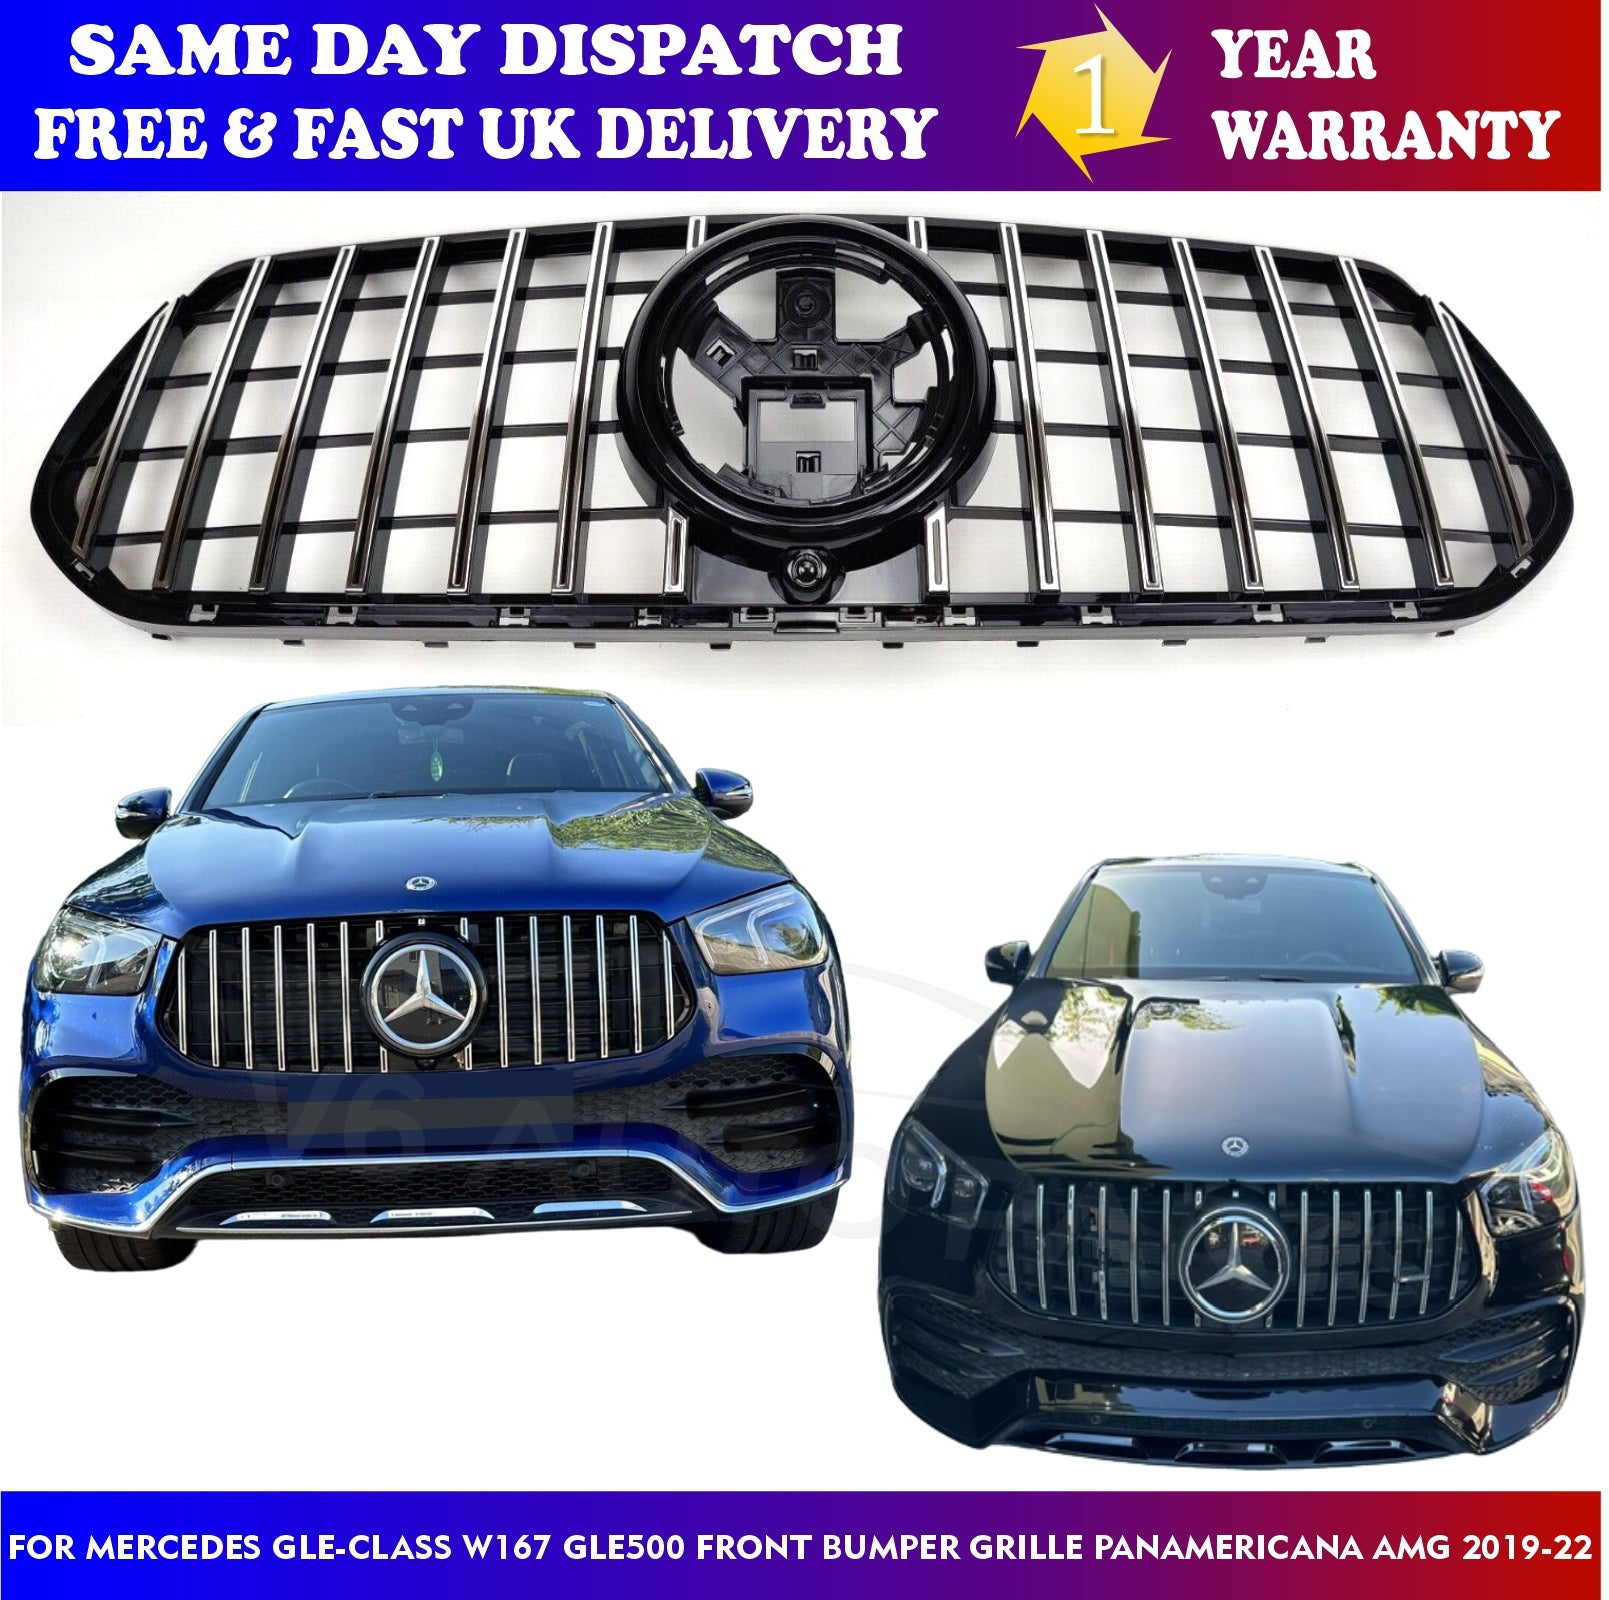 For Mercedes GLE-Class W167 GLE400 Front Bumper Grille Panamericana AM